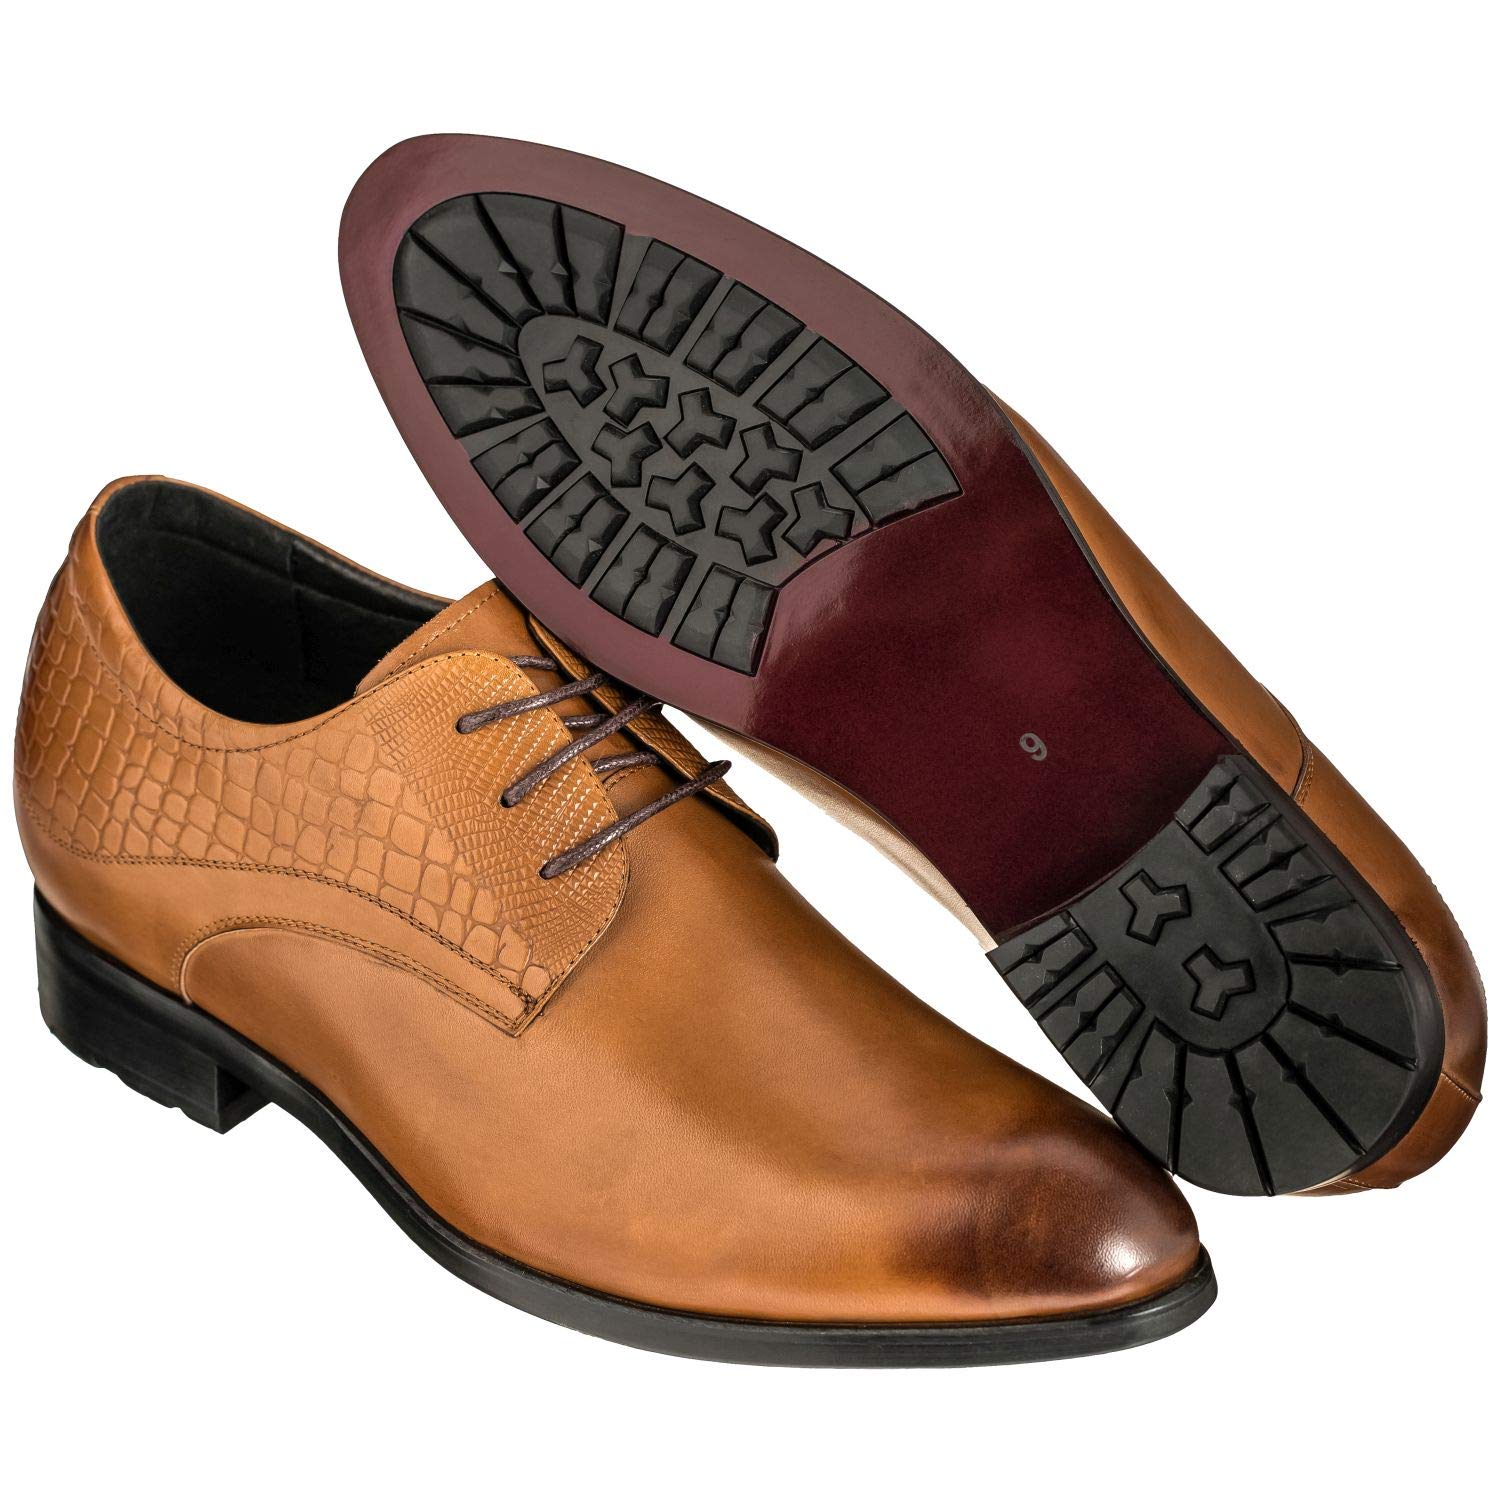 CALTO Height Increasing Elevator Shoes 3 Inches Taller - Leather Dress Shoes - Men Invisible Elevated High Heels Oxfords